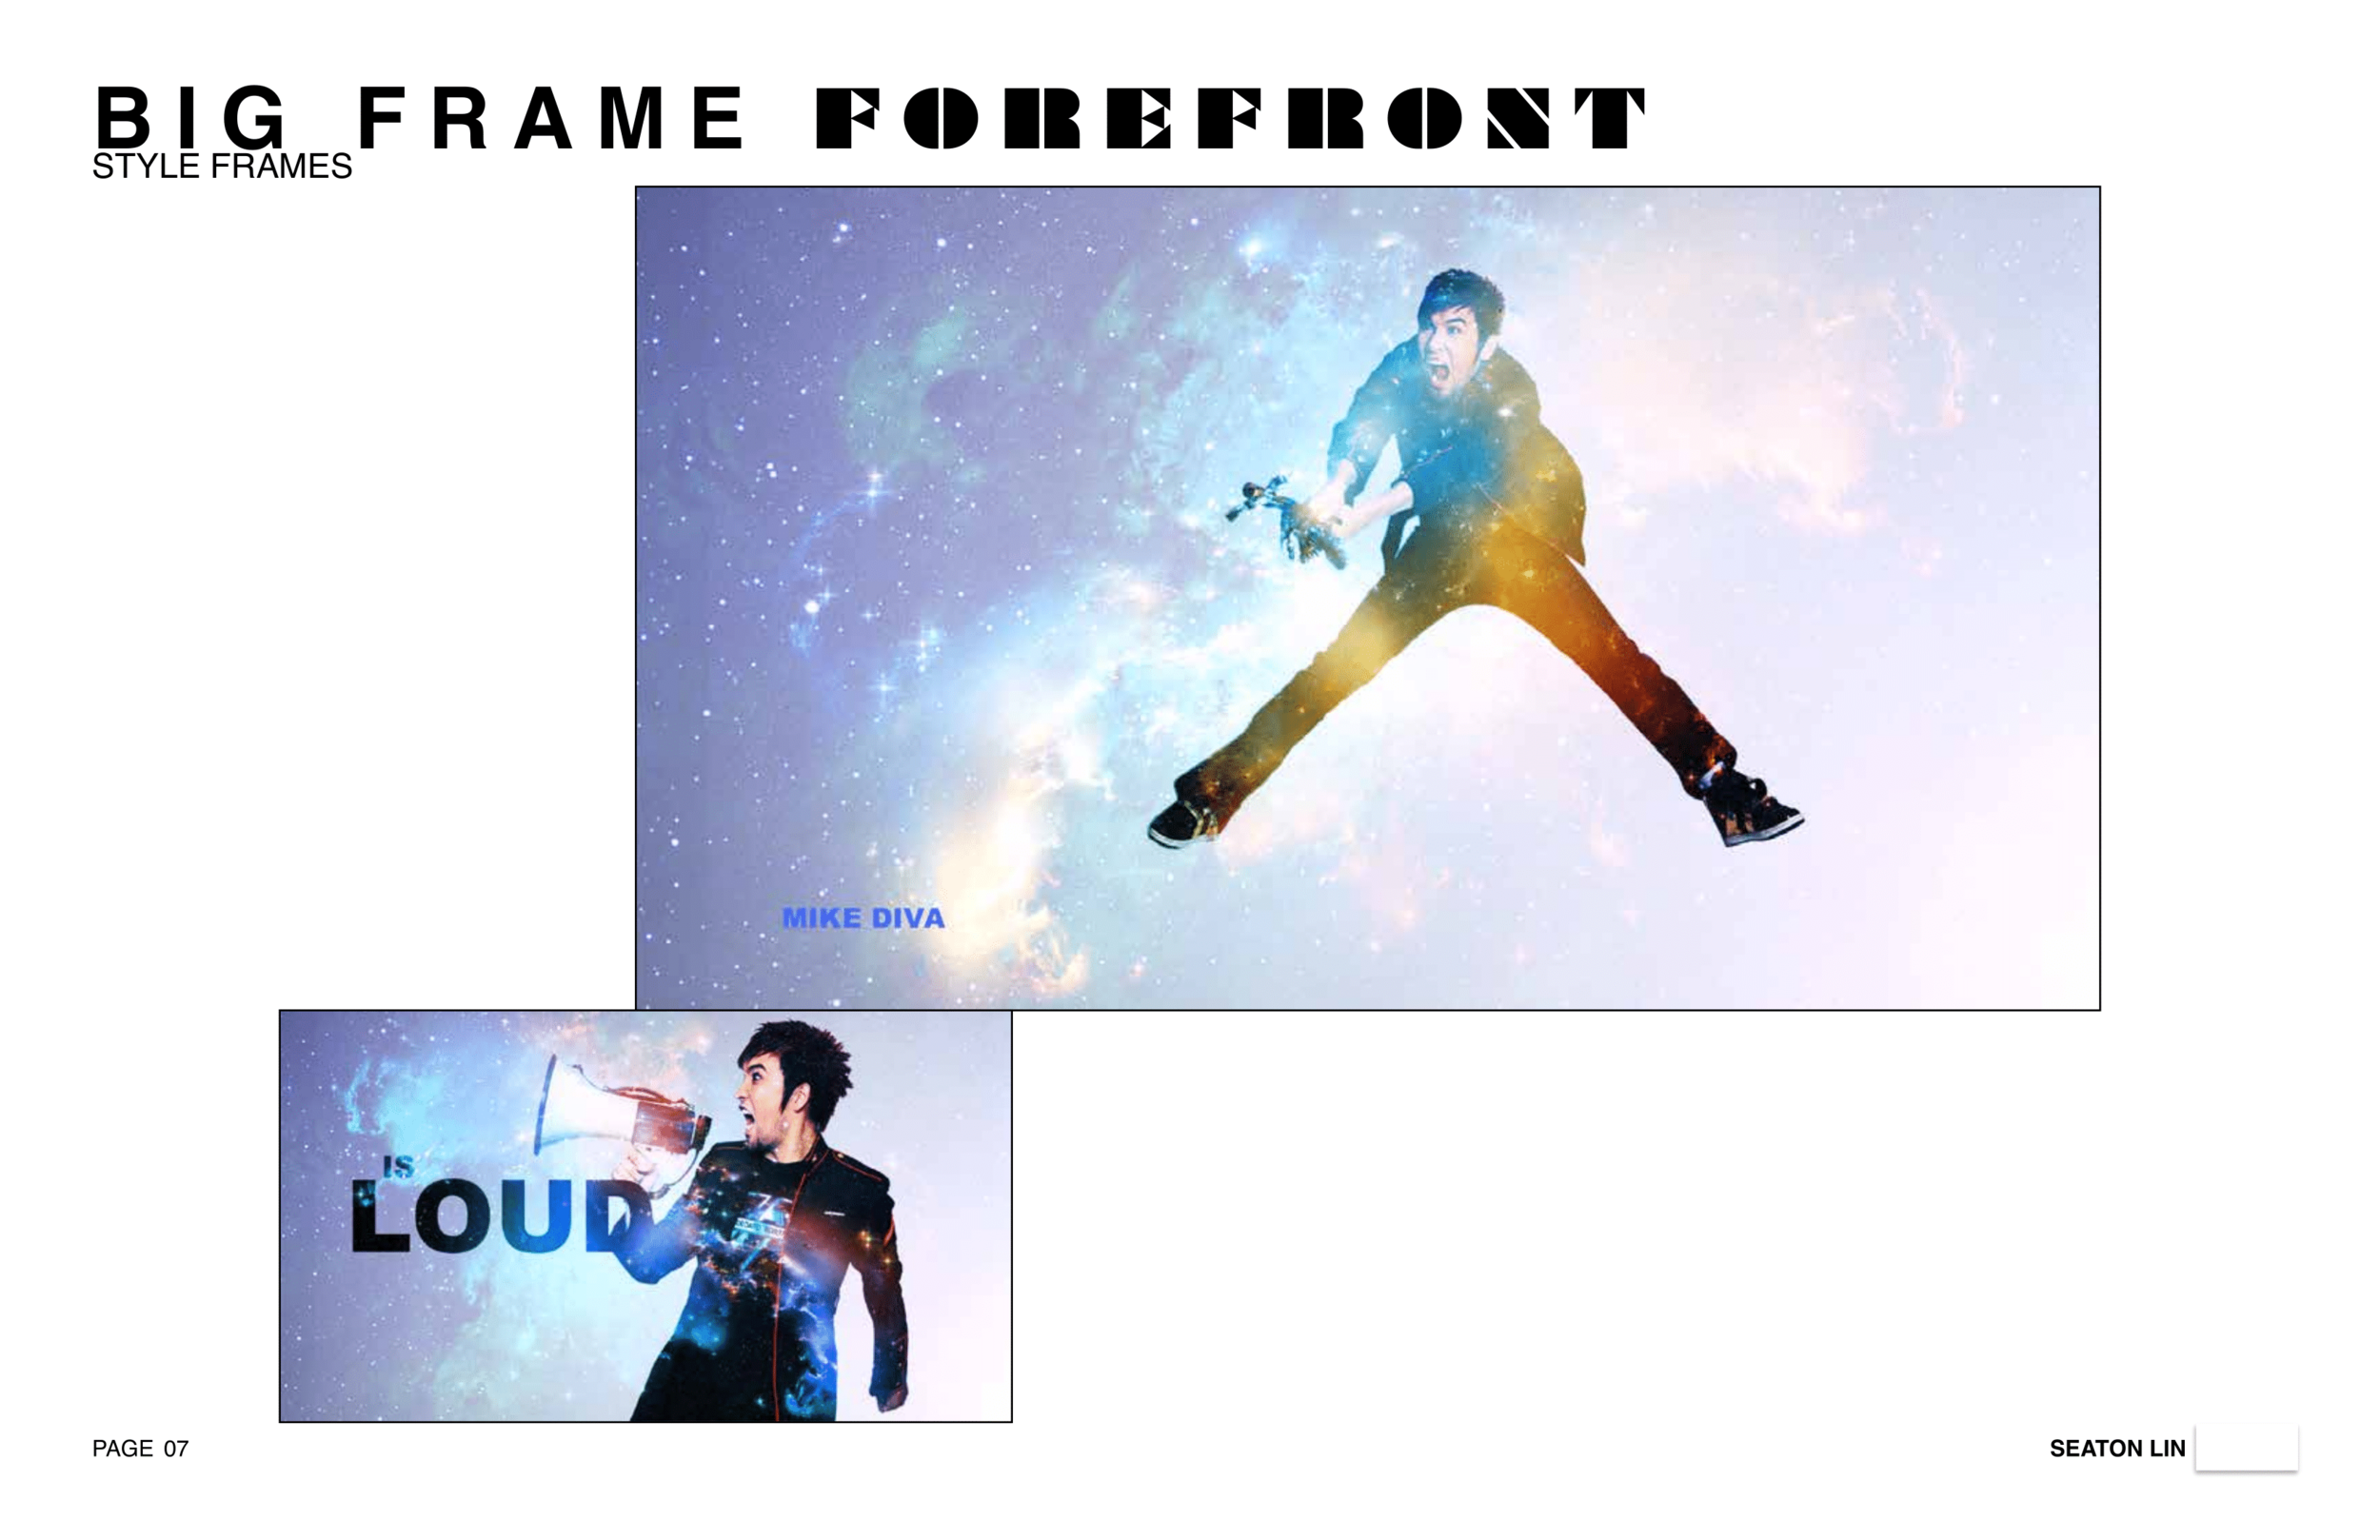 BigFrame_ForeFront_Treatment_SeatonLin-07.png